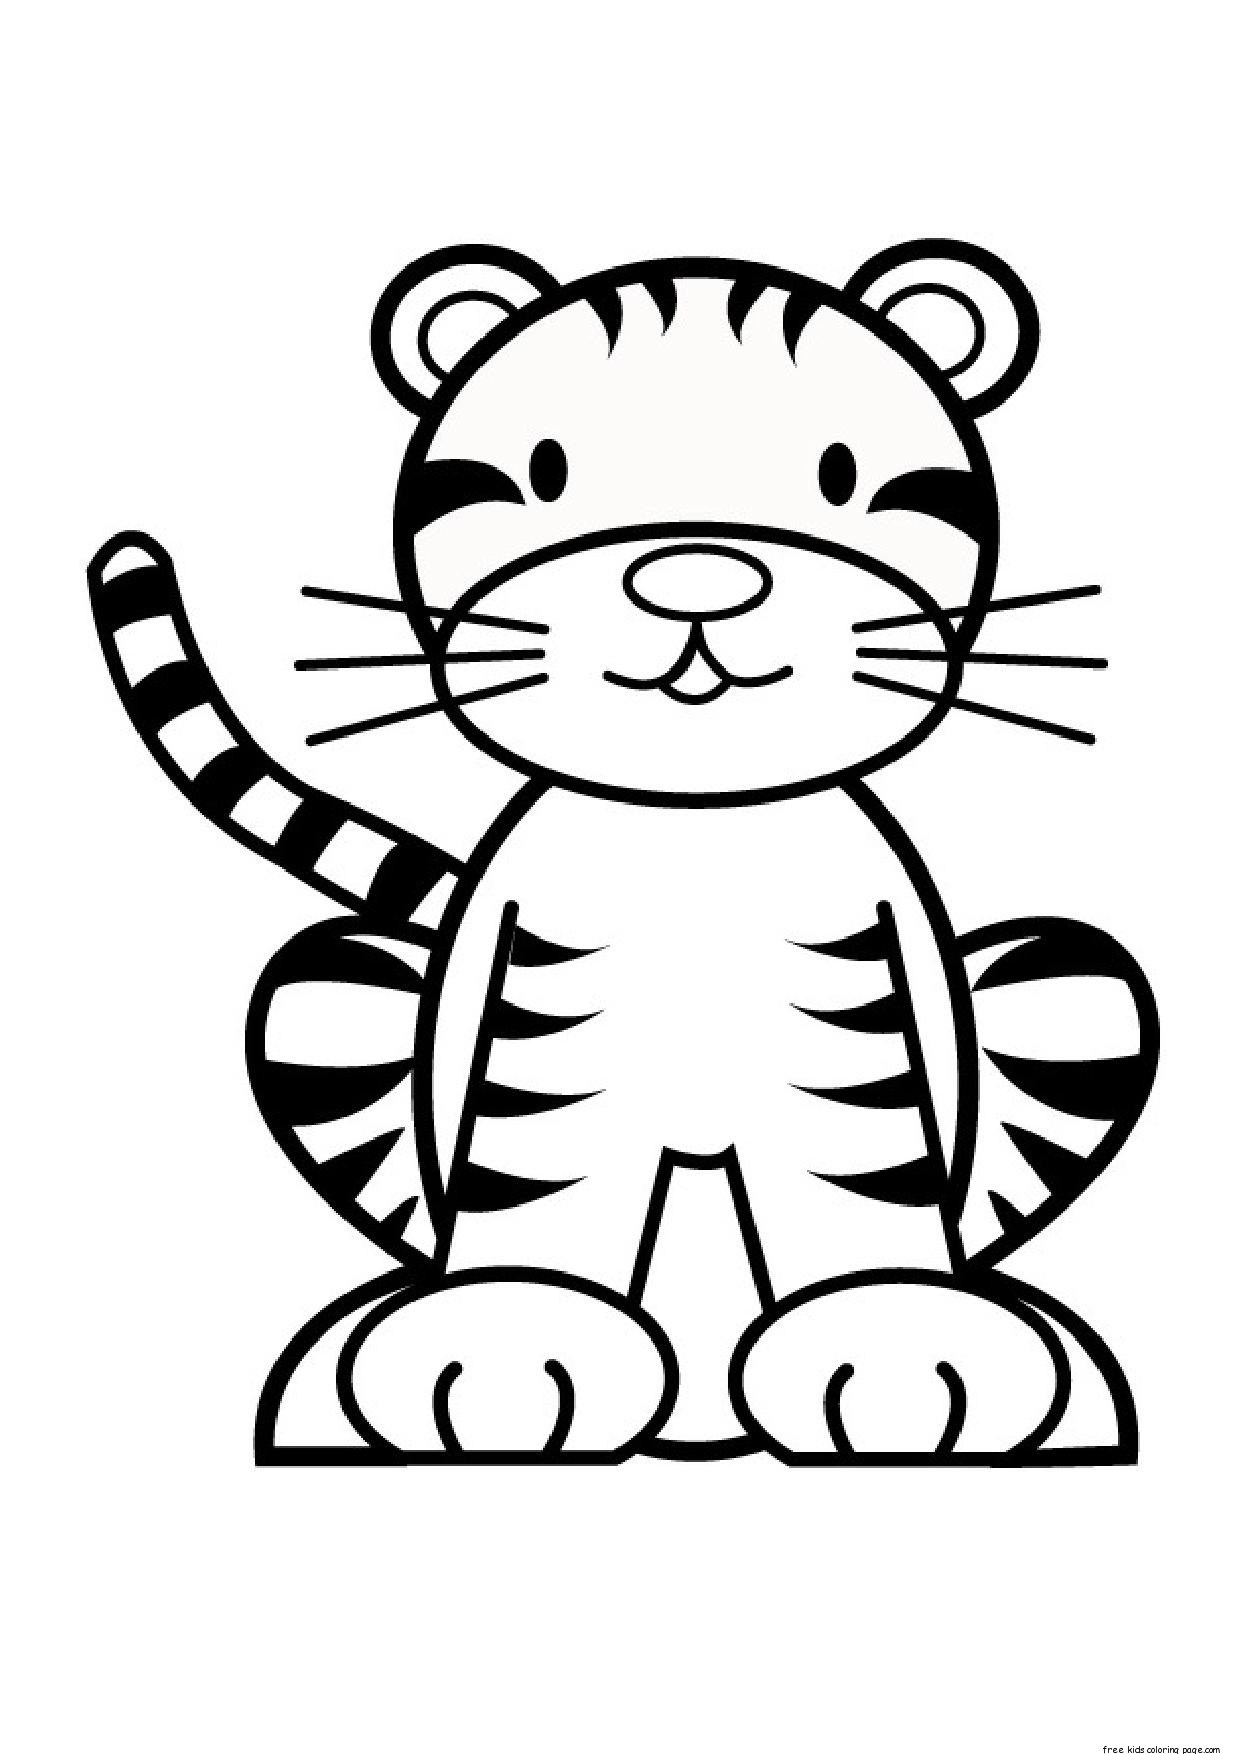 Tiger Coloring Sheet. daniel tiger coloring pages my coloring ...